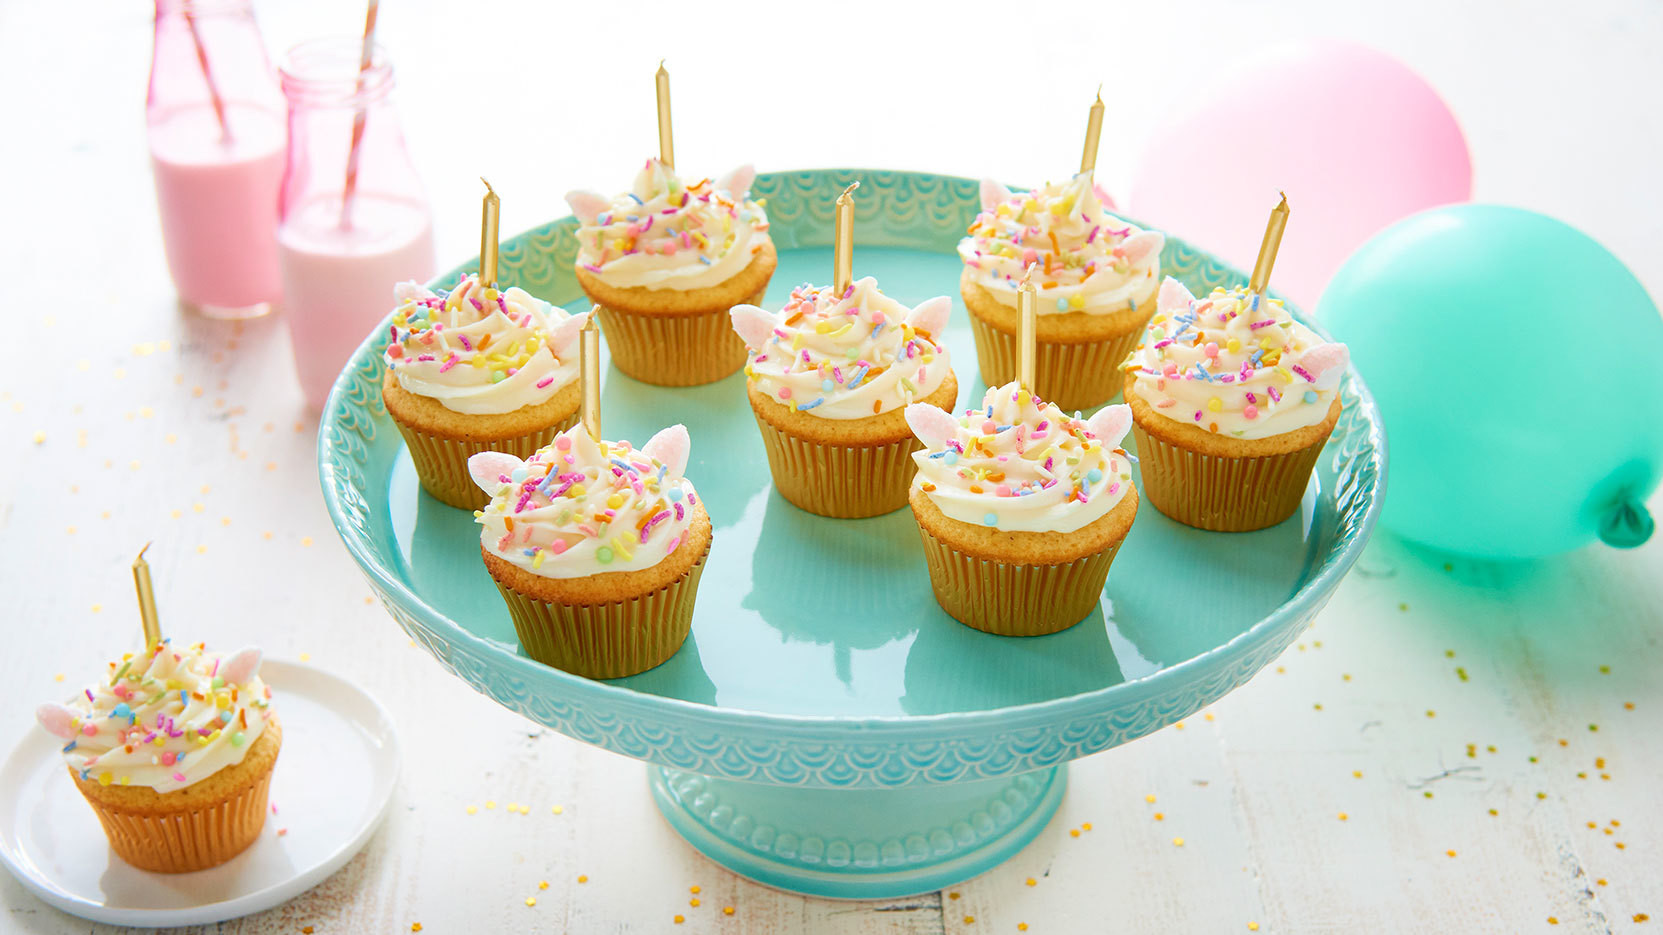 Unicorn Party Food Ideas Pony Tails
 Magical Unicorn Birthday Party Ideas for Kids EatingWell